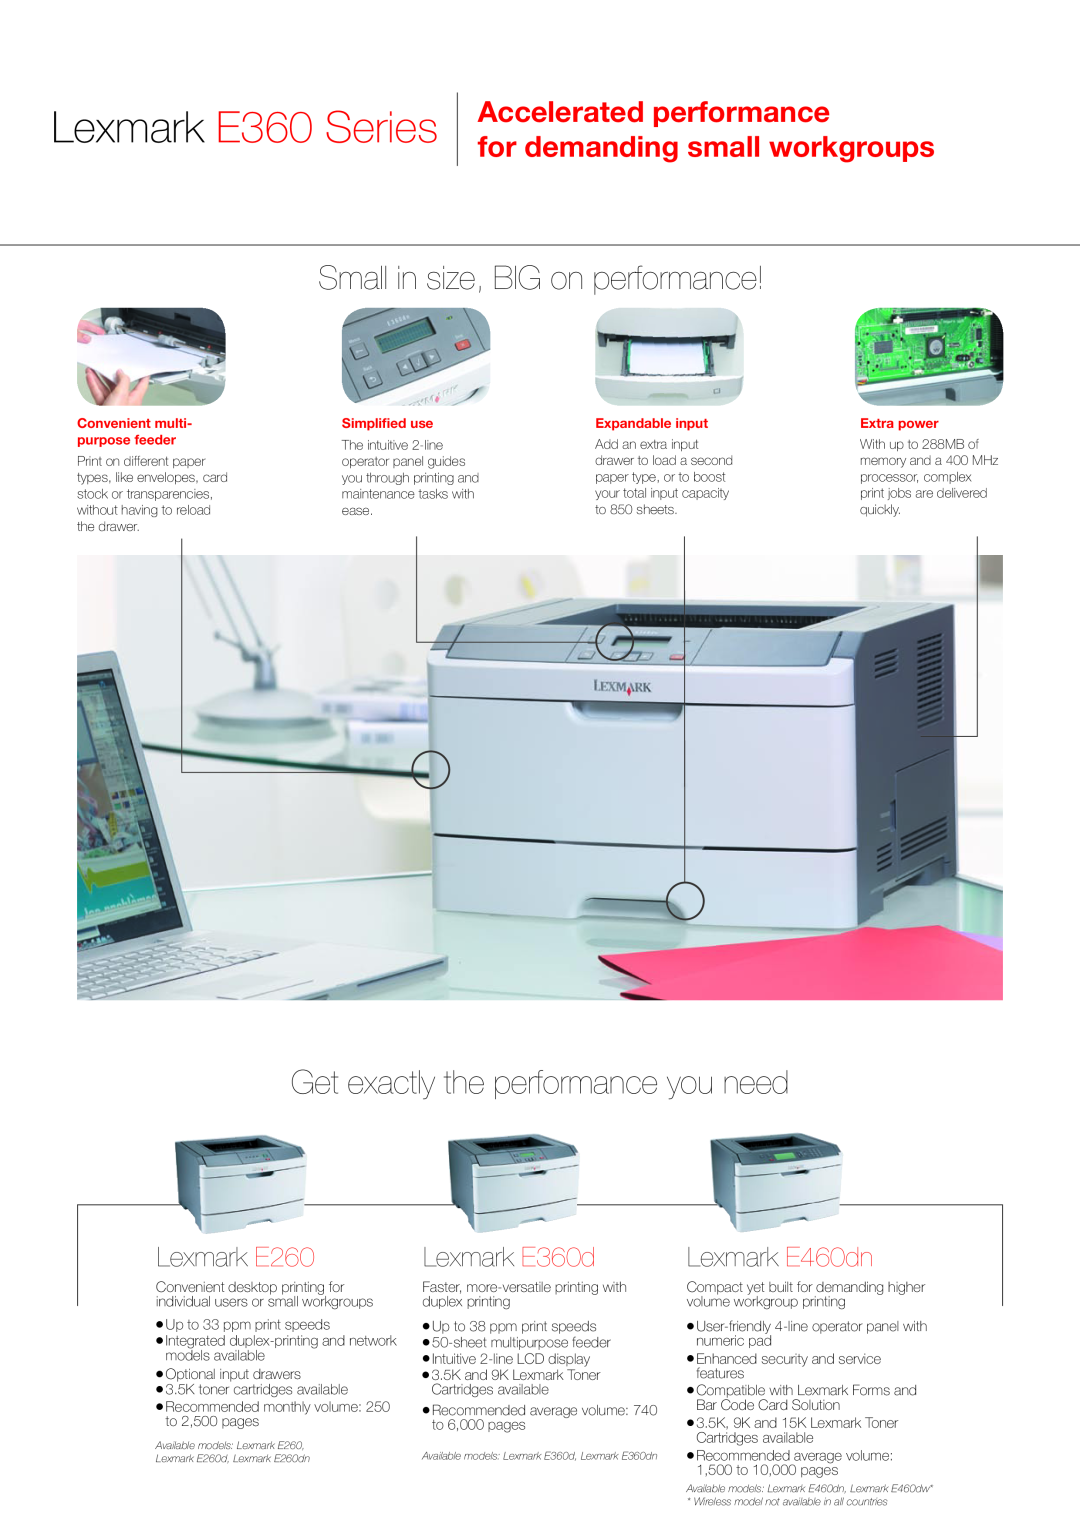 Lexmark E360D Small in size, BIG on performance, Get exactly the performance you need, Lexmark E360 Series, Lexmark E260 